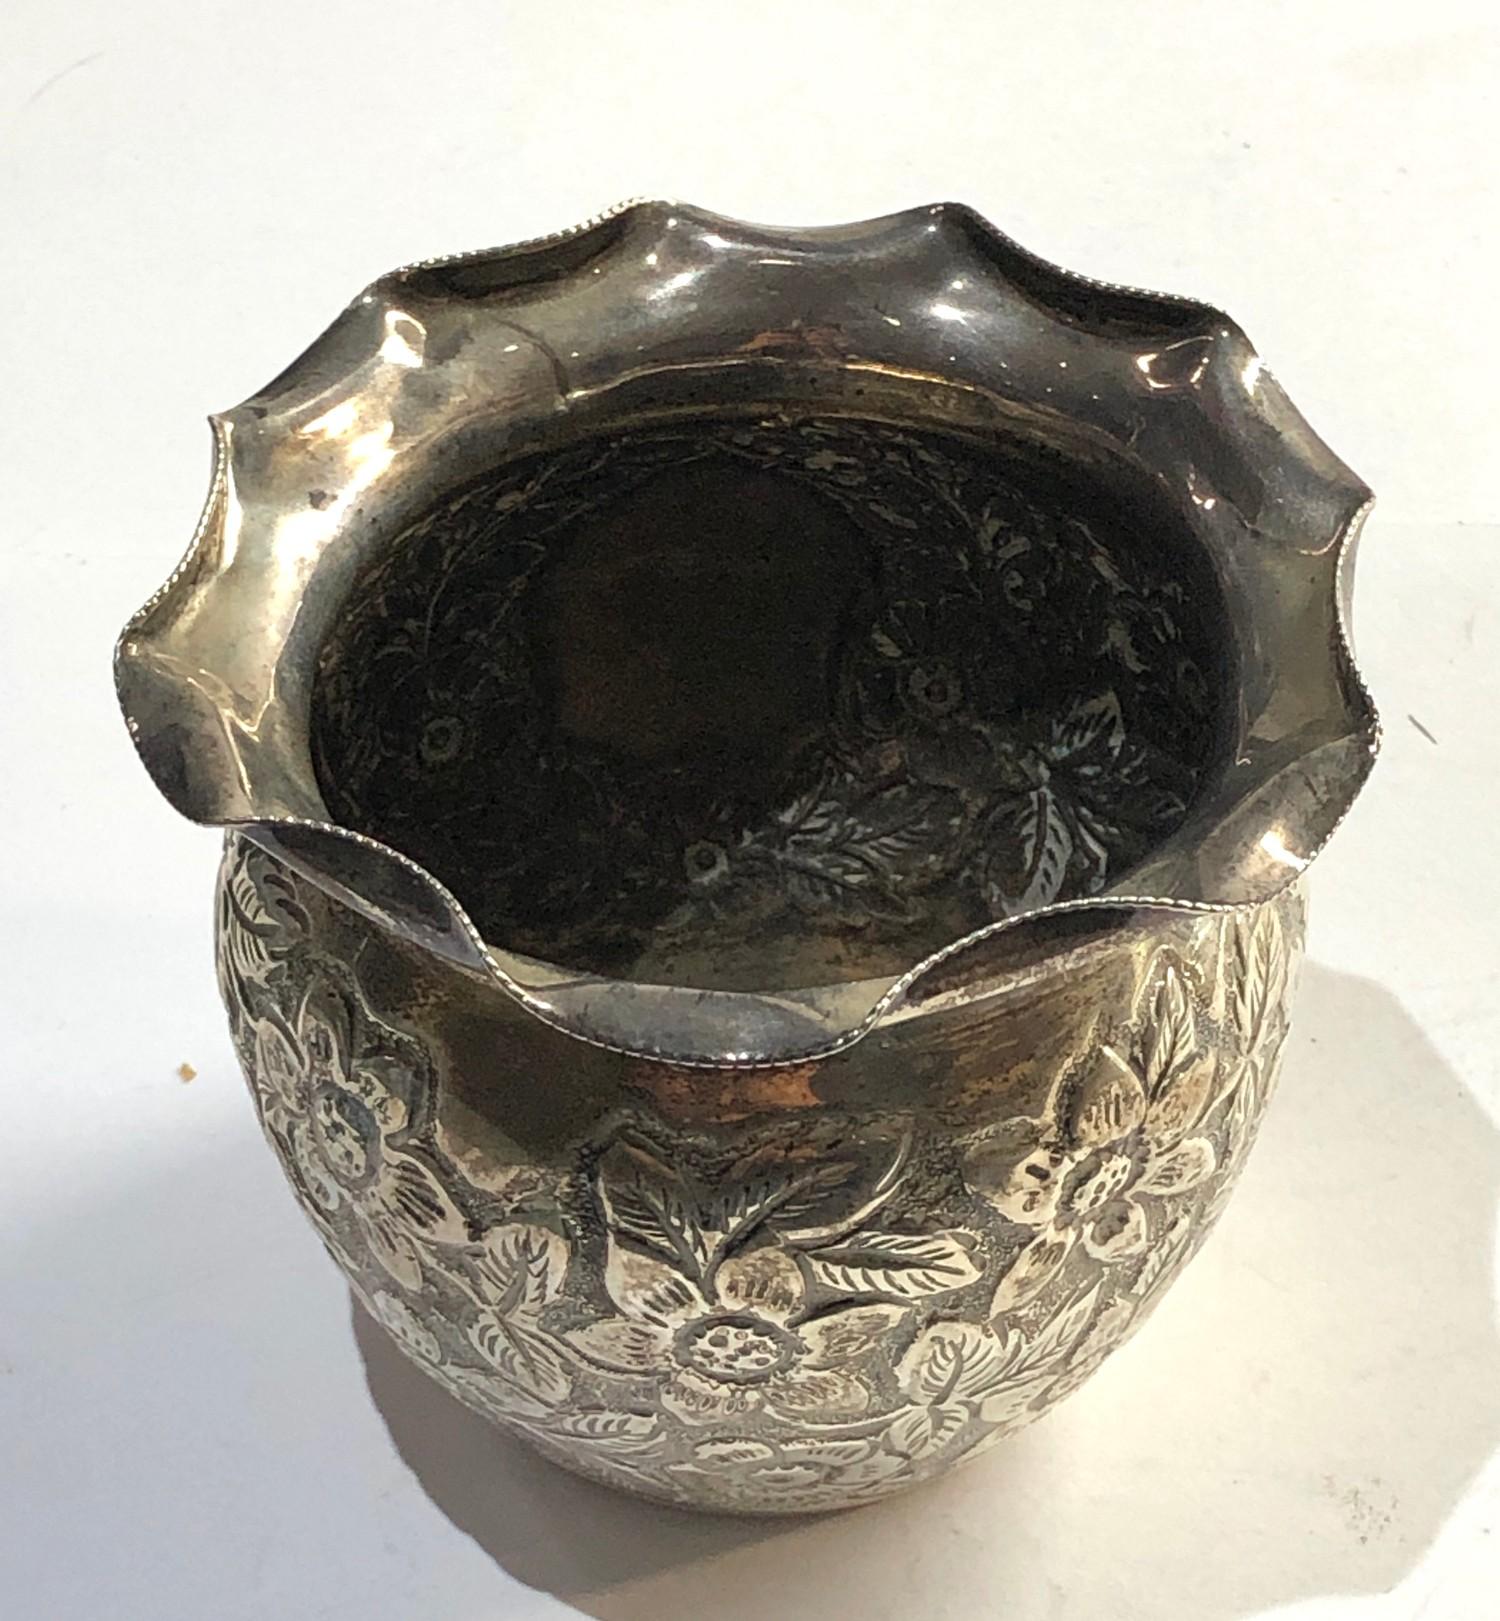 Antique silver floral embossed pot measures approx 9.5cm dia height 8cm weight 90g Birmingham silver - Image 2 of 3